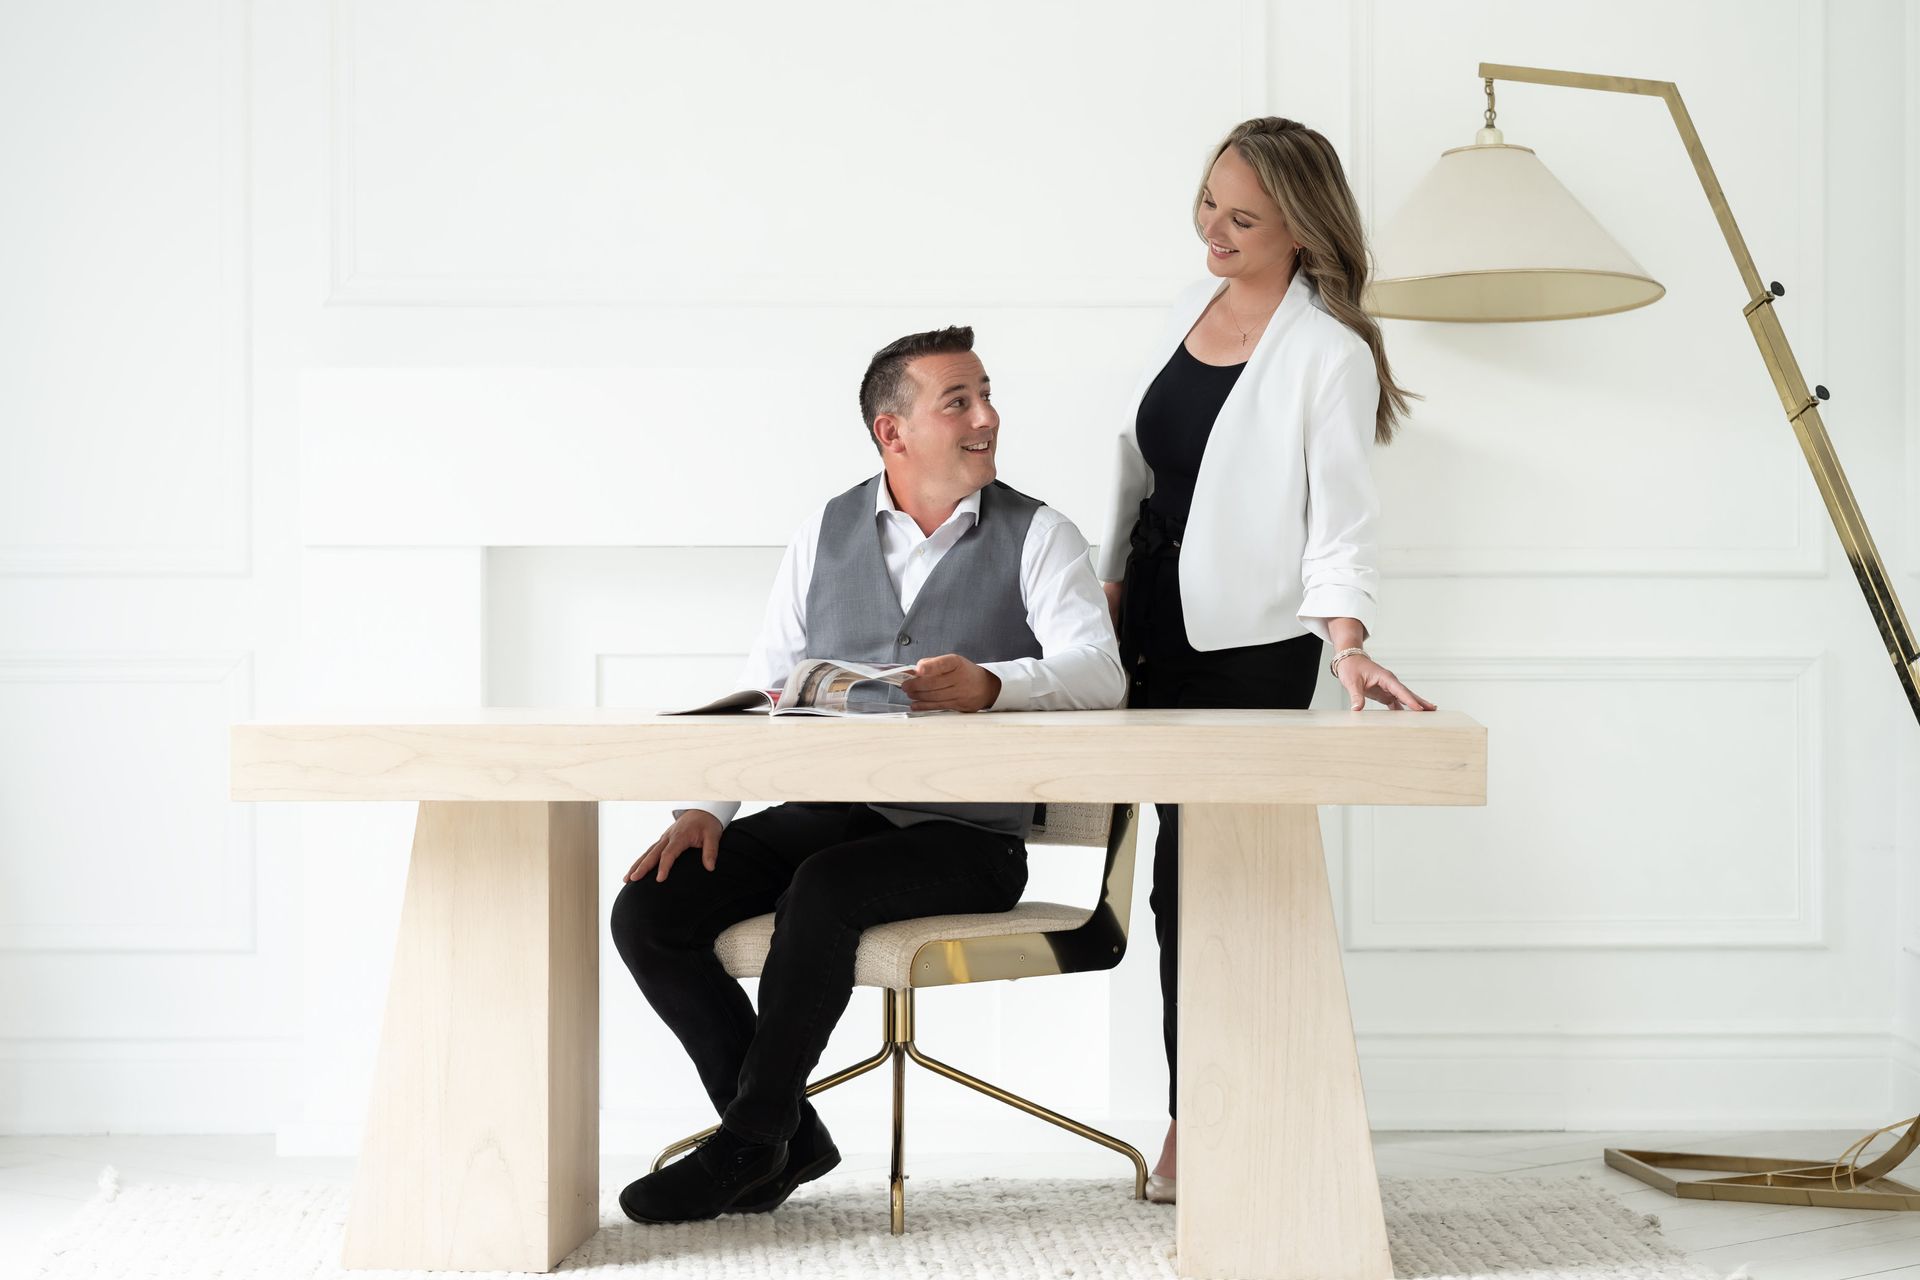 A professional man and woman confidently engaging with each other in a modern office setting, with a focus on their connection and the man's candid expression.